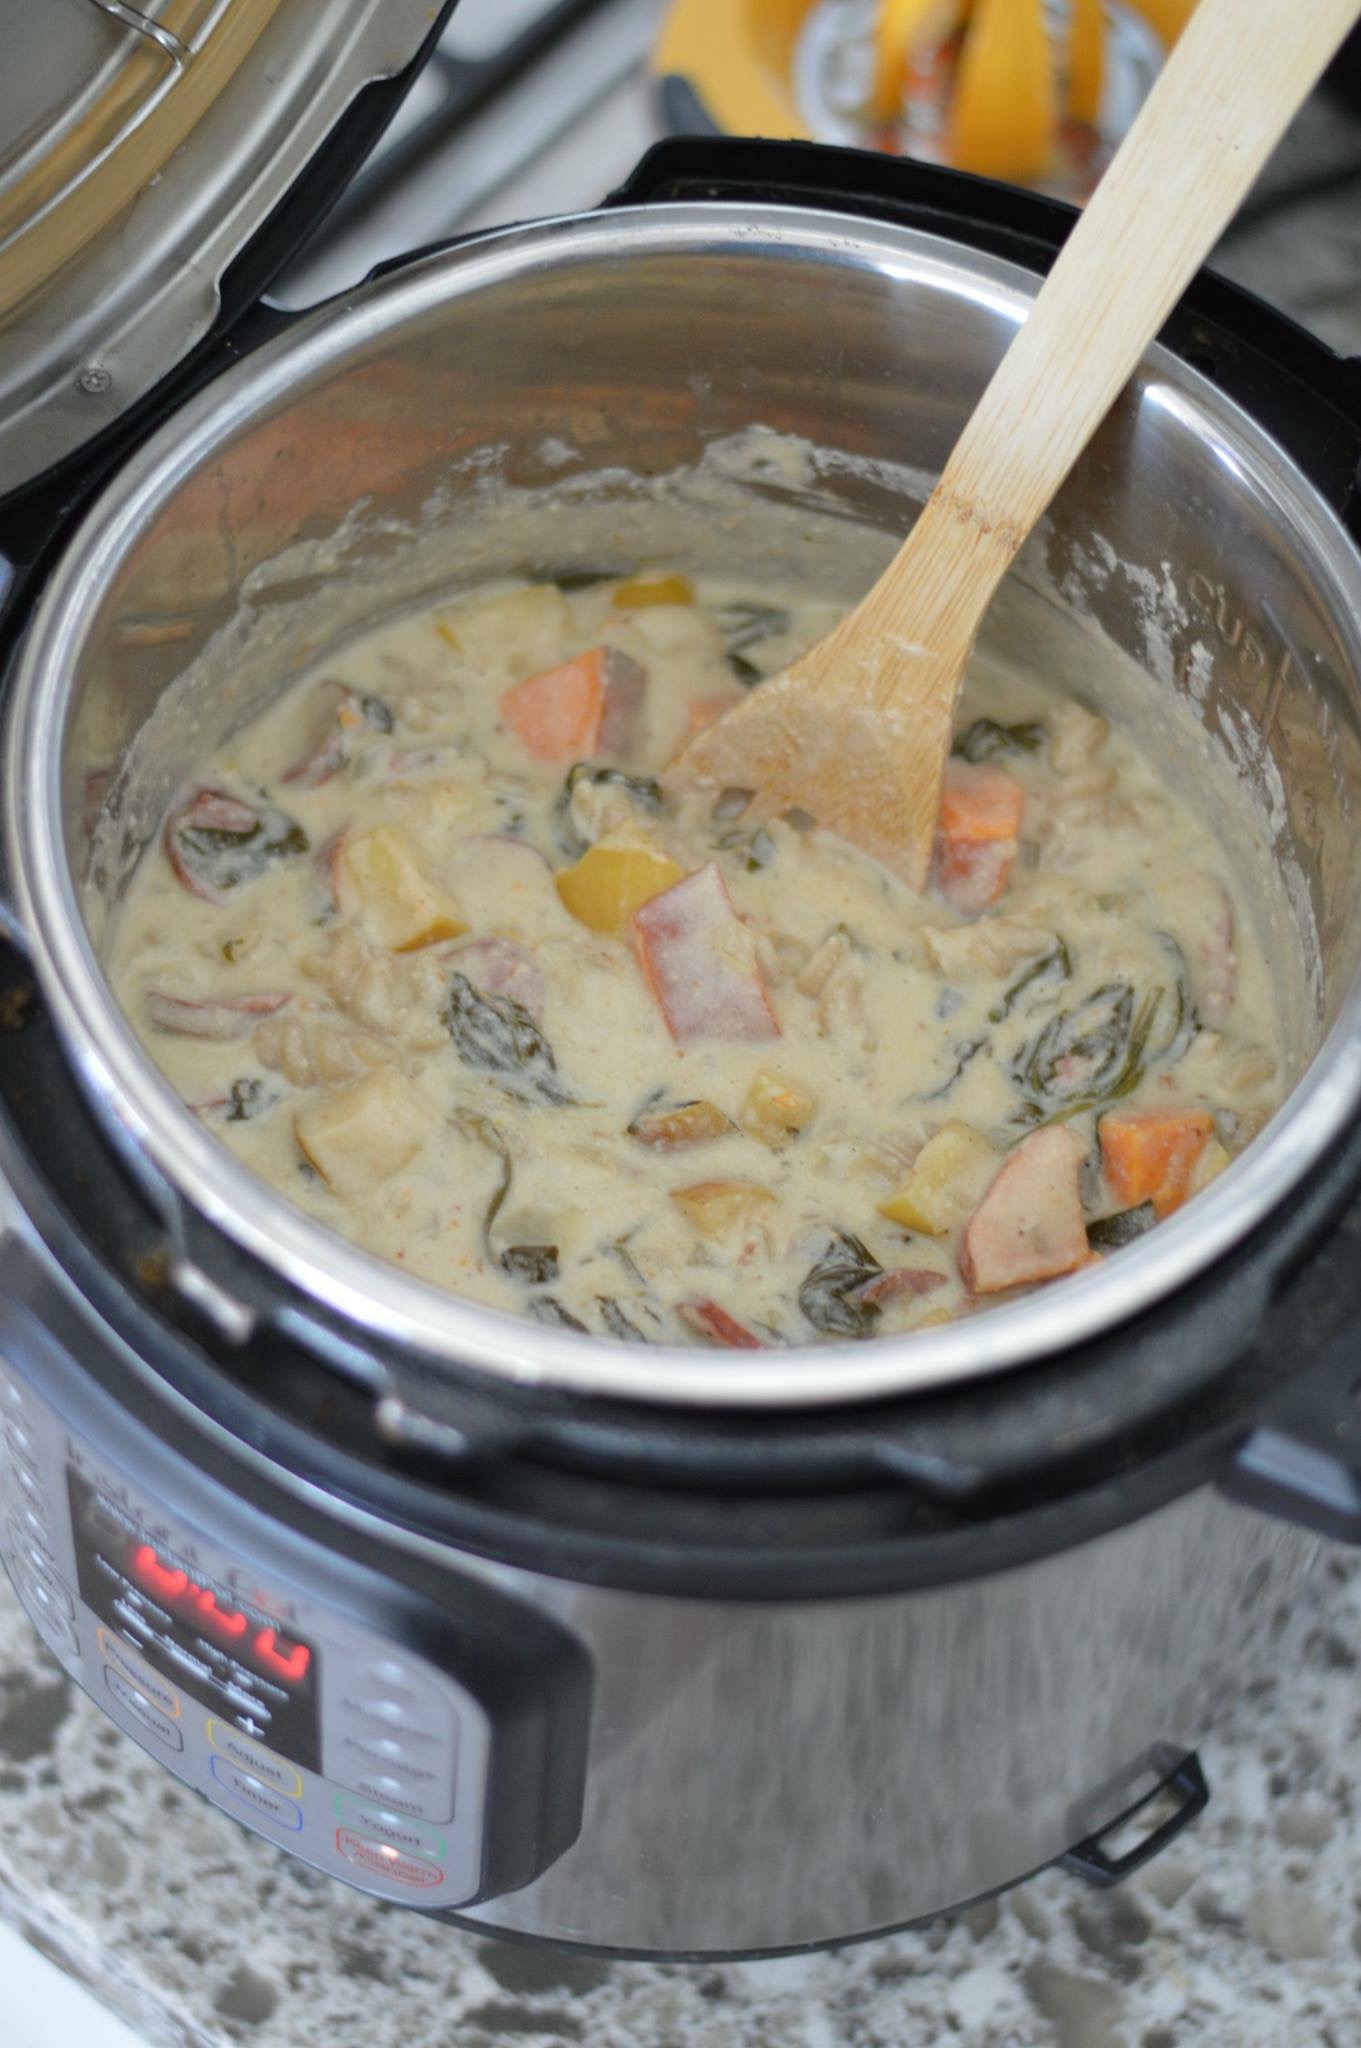 The One Major Fail Of The CrockPot Lunch Crock Food Warmer, by Heather  Hintze